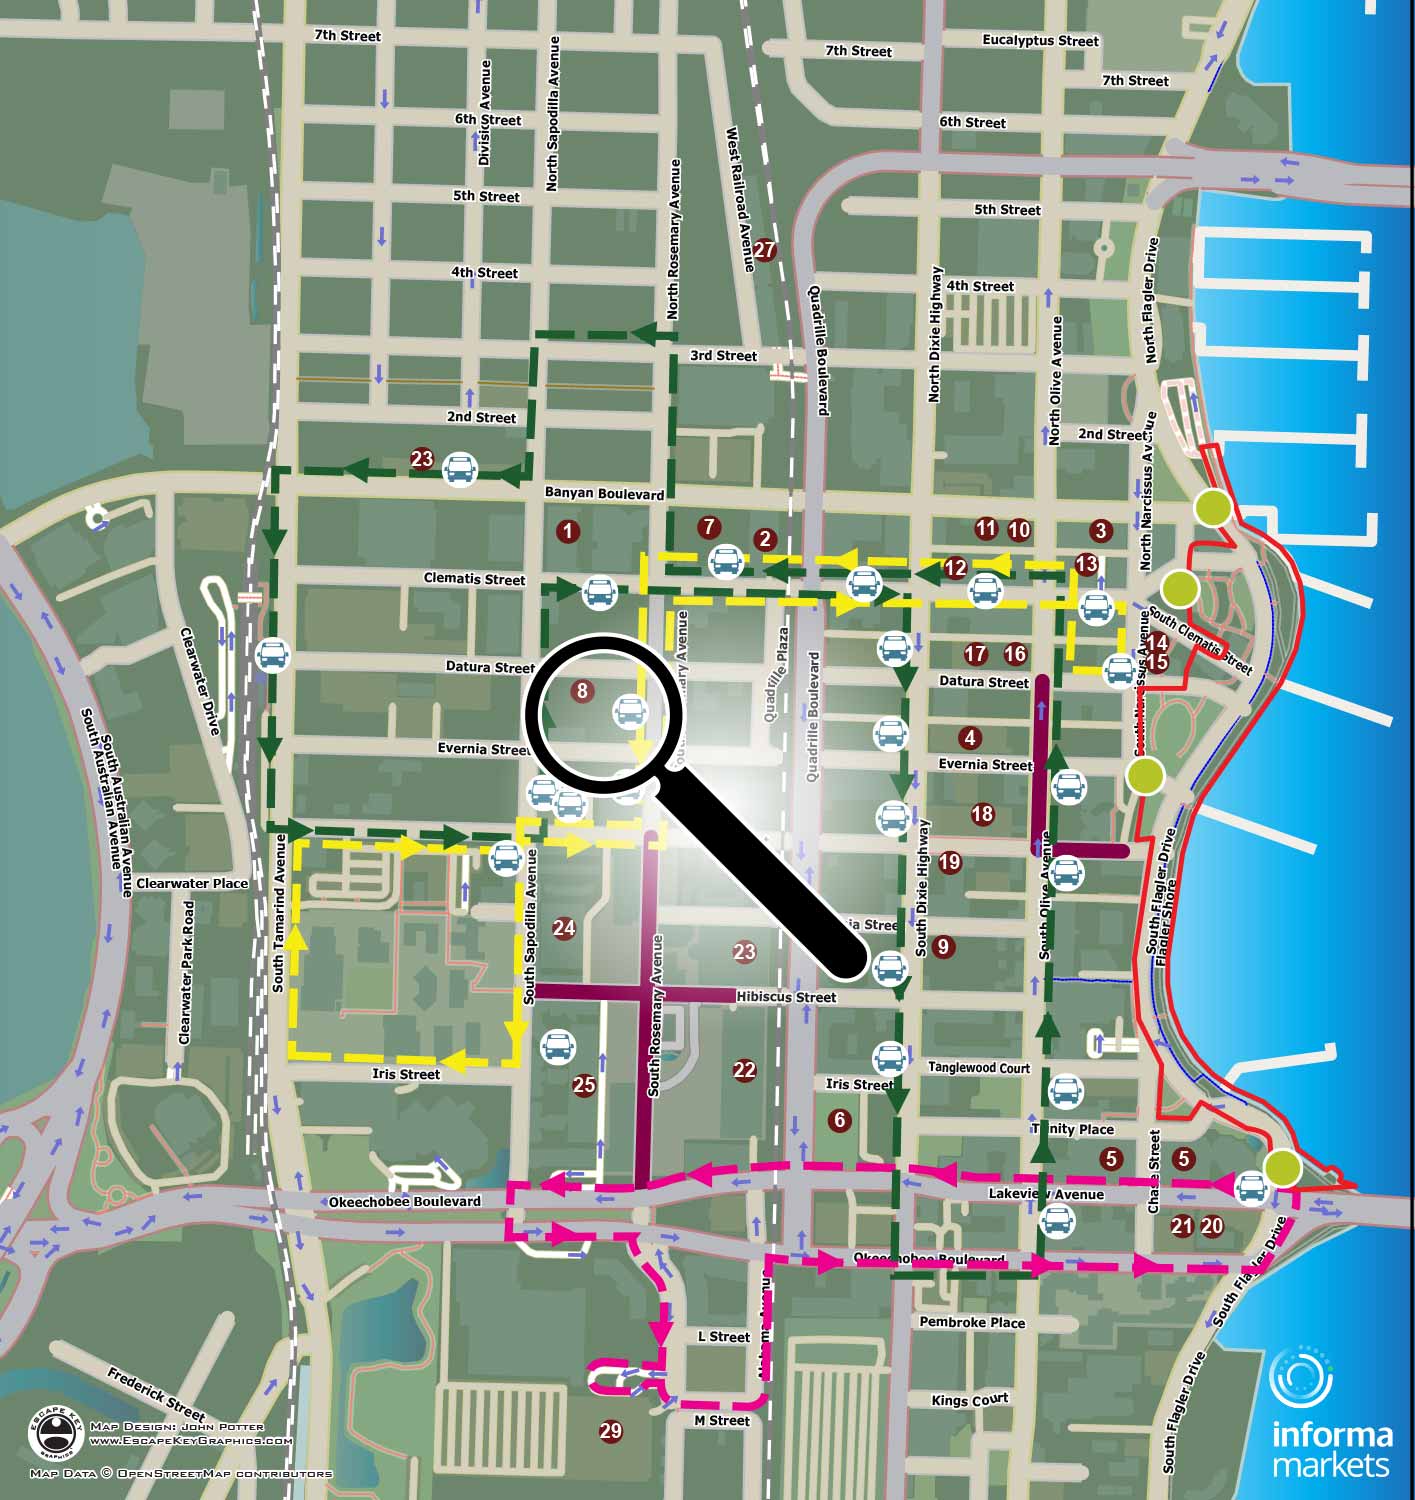 boat show parking and transportation map